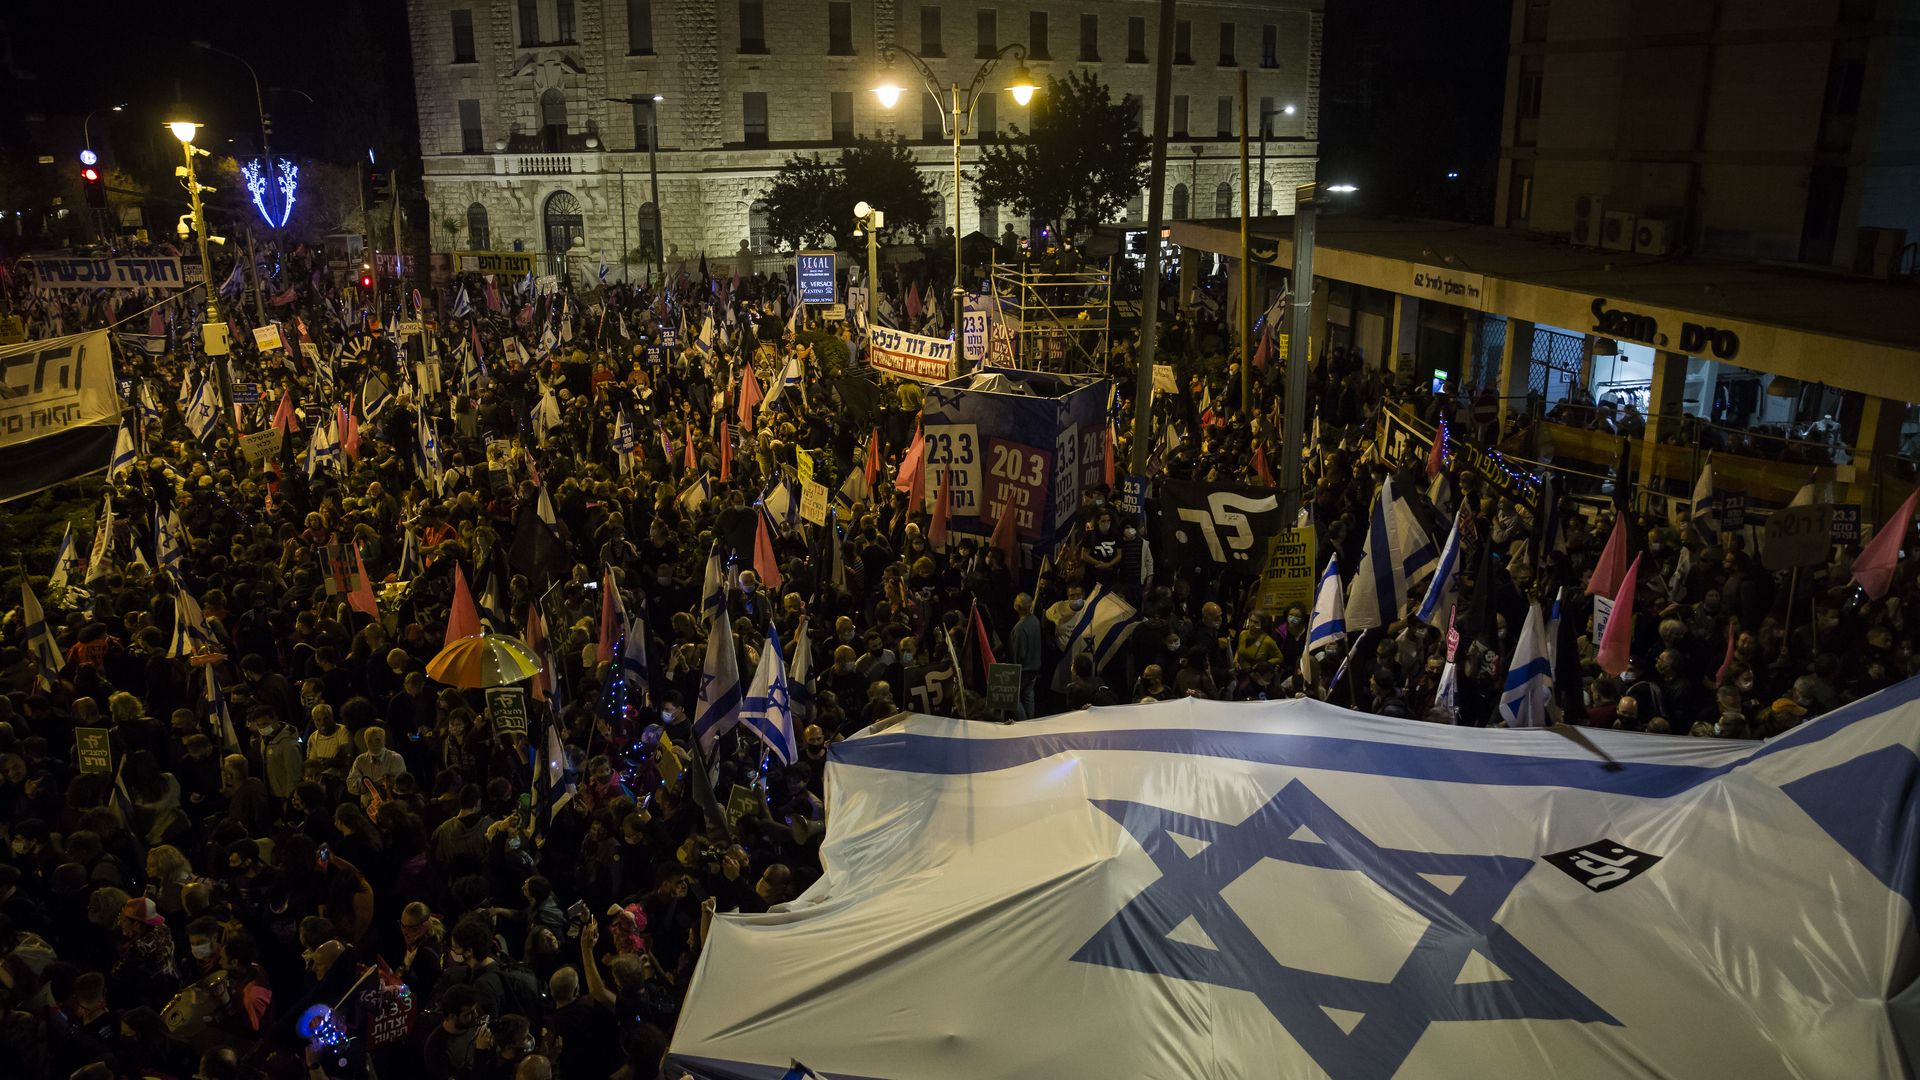 Thousand of Israelis attend a protest against Israeli Prime Minister, Benjamin Netanyahu on March 20